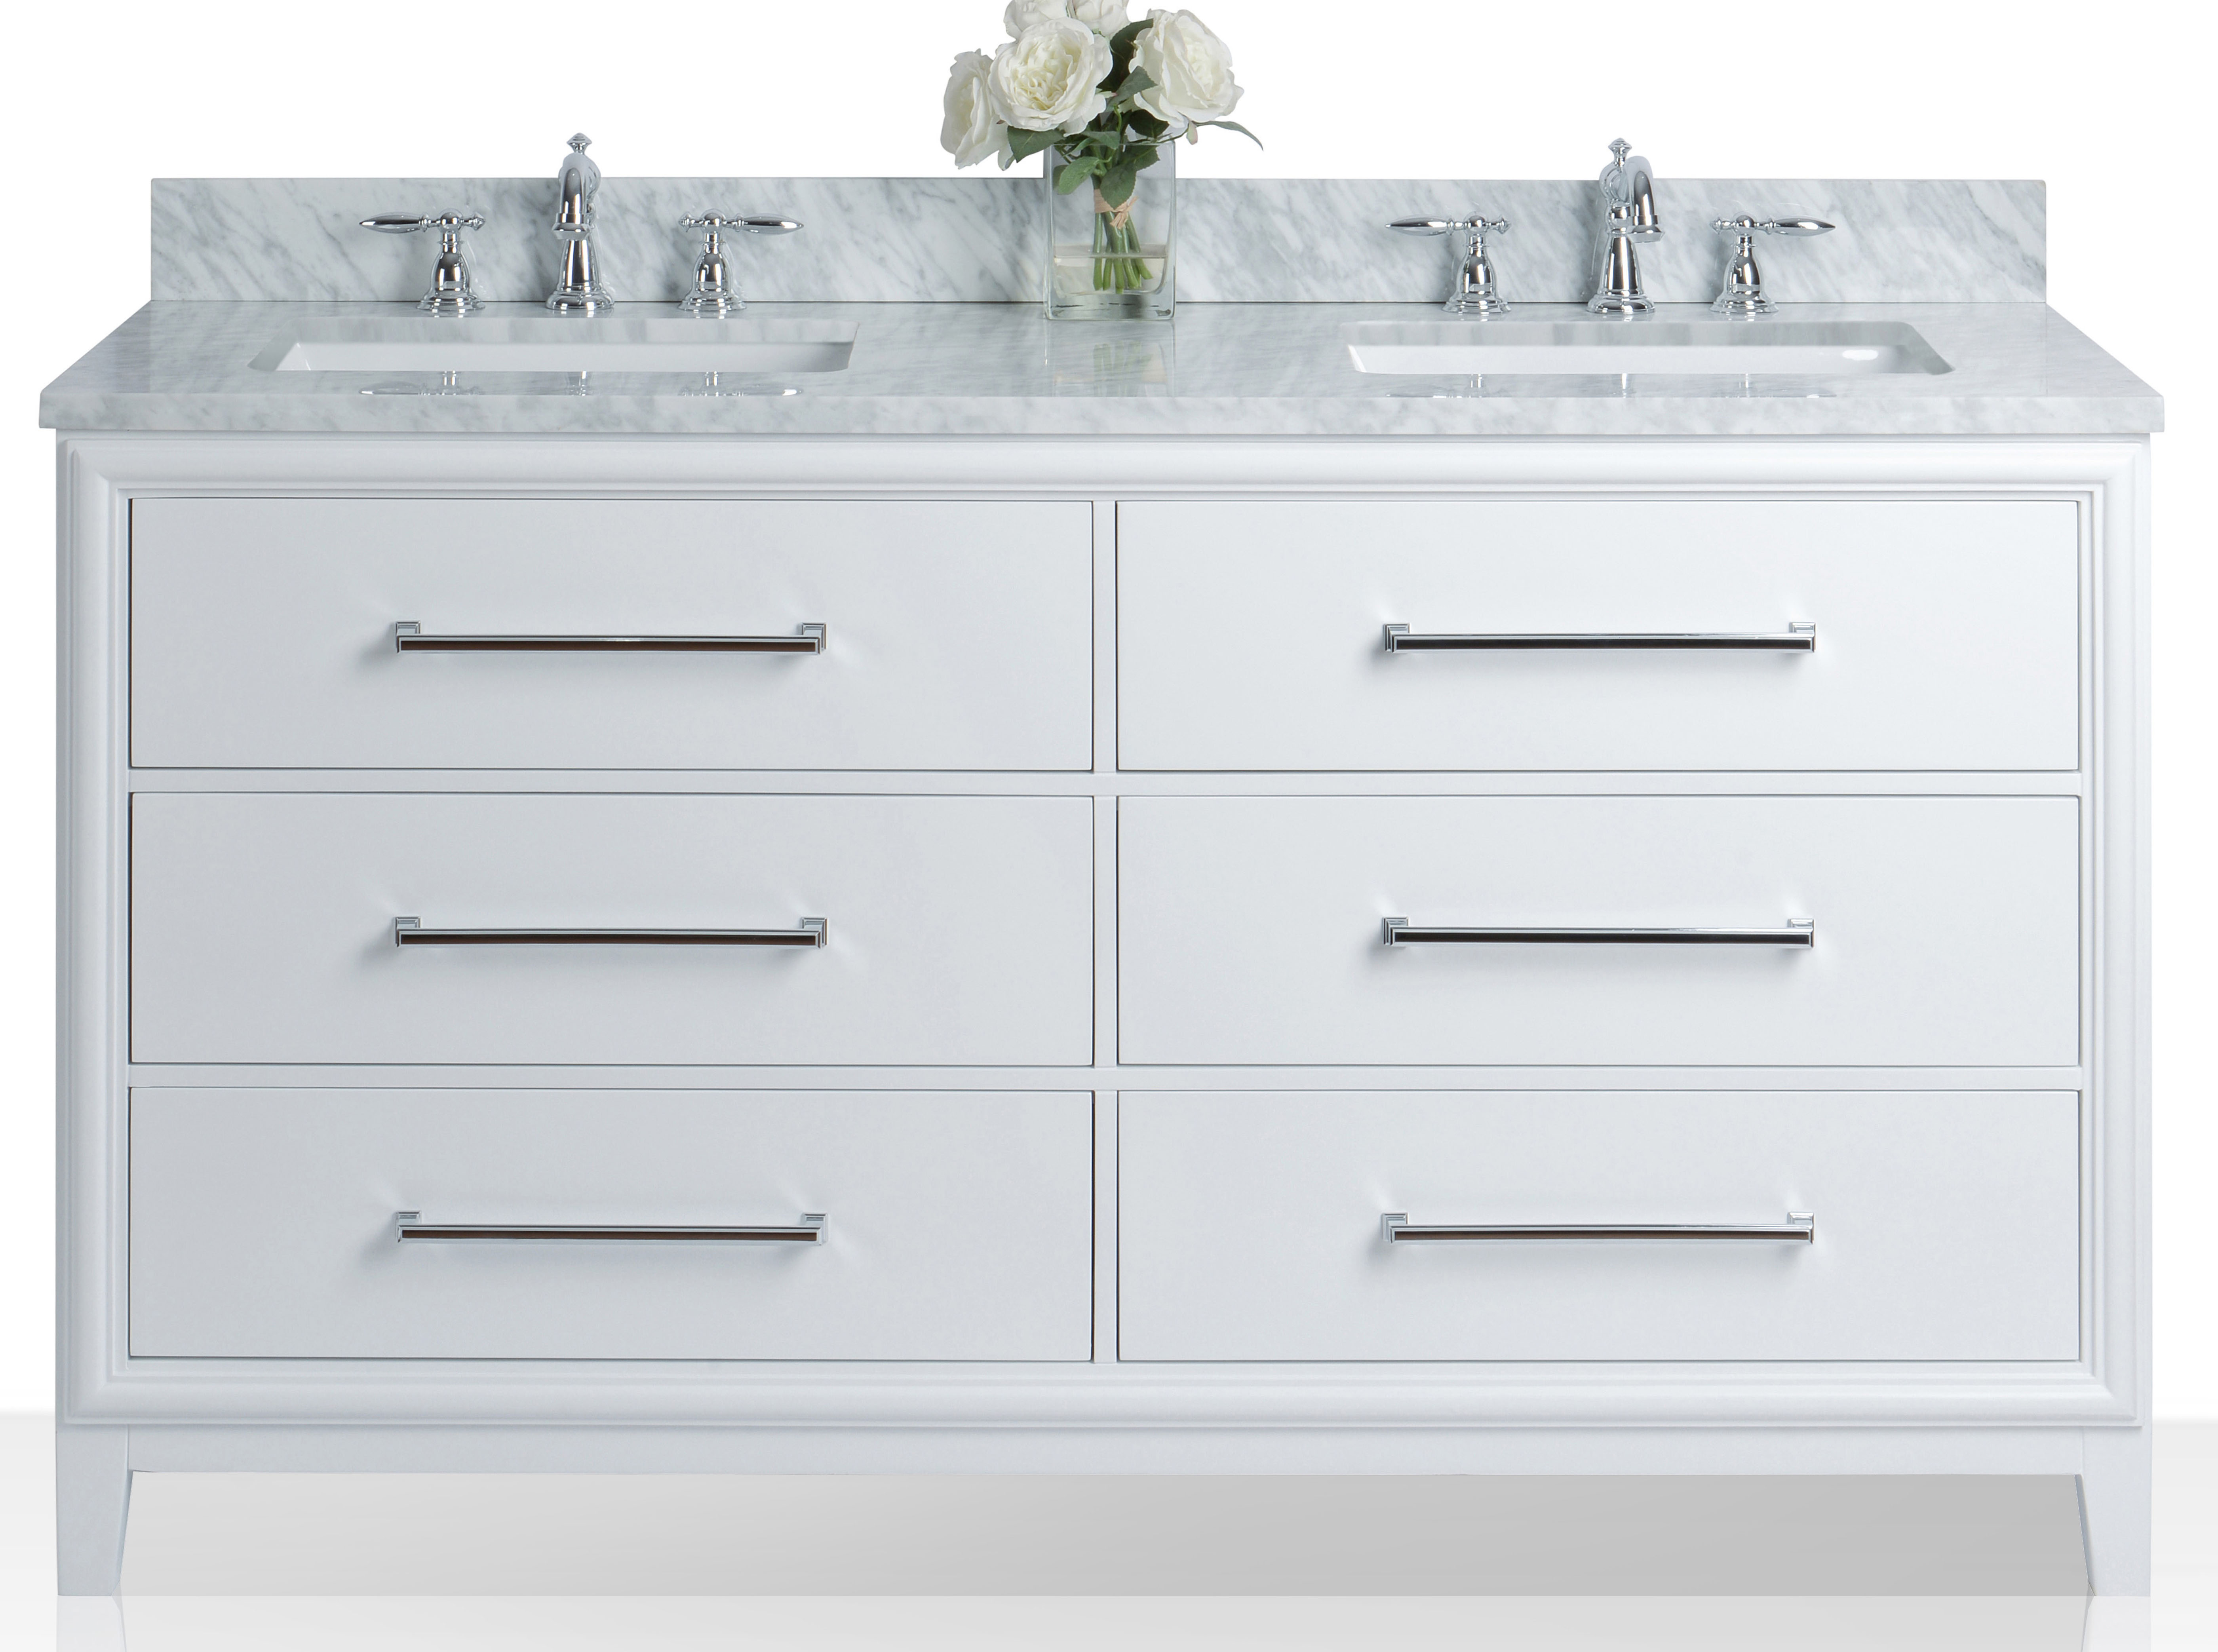 60" Bath Vanity Set in White with Italian Cararra White Marble Vanity Top and White Undermount Basins (No Mirror)